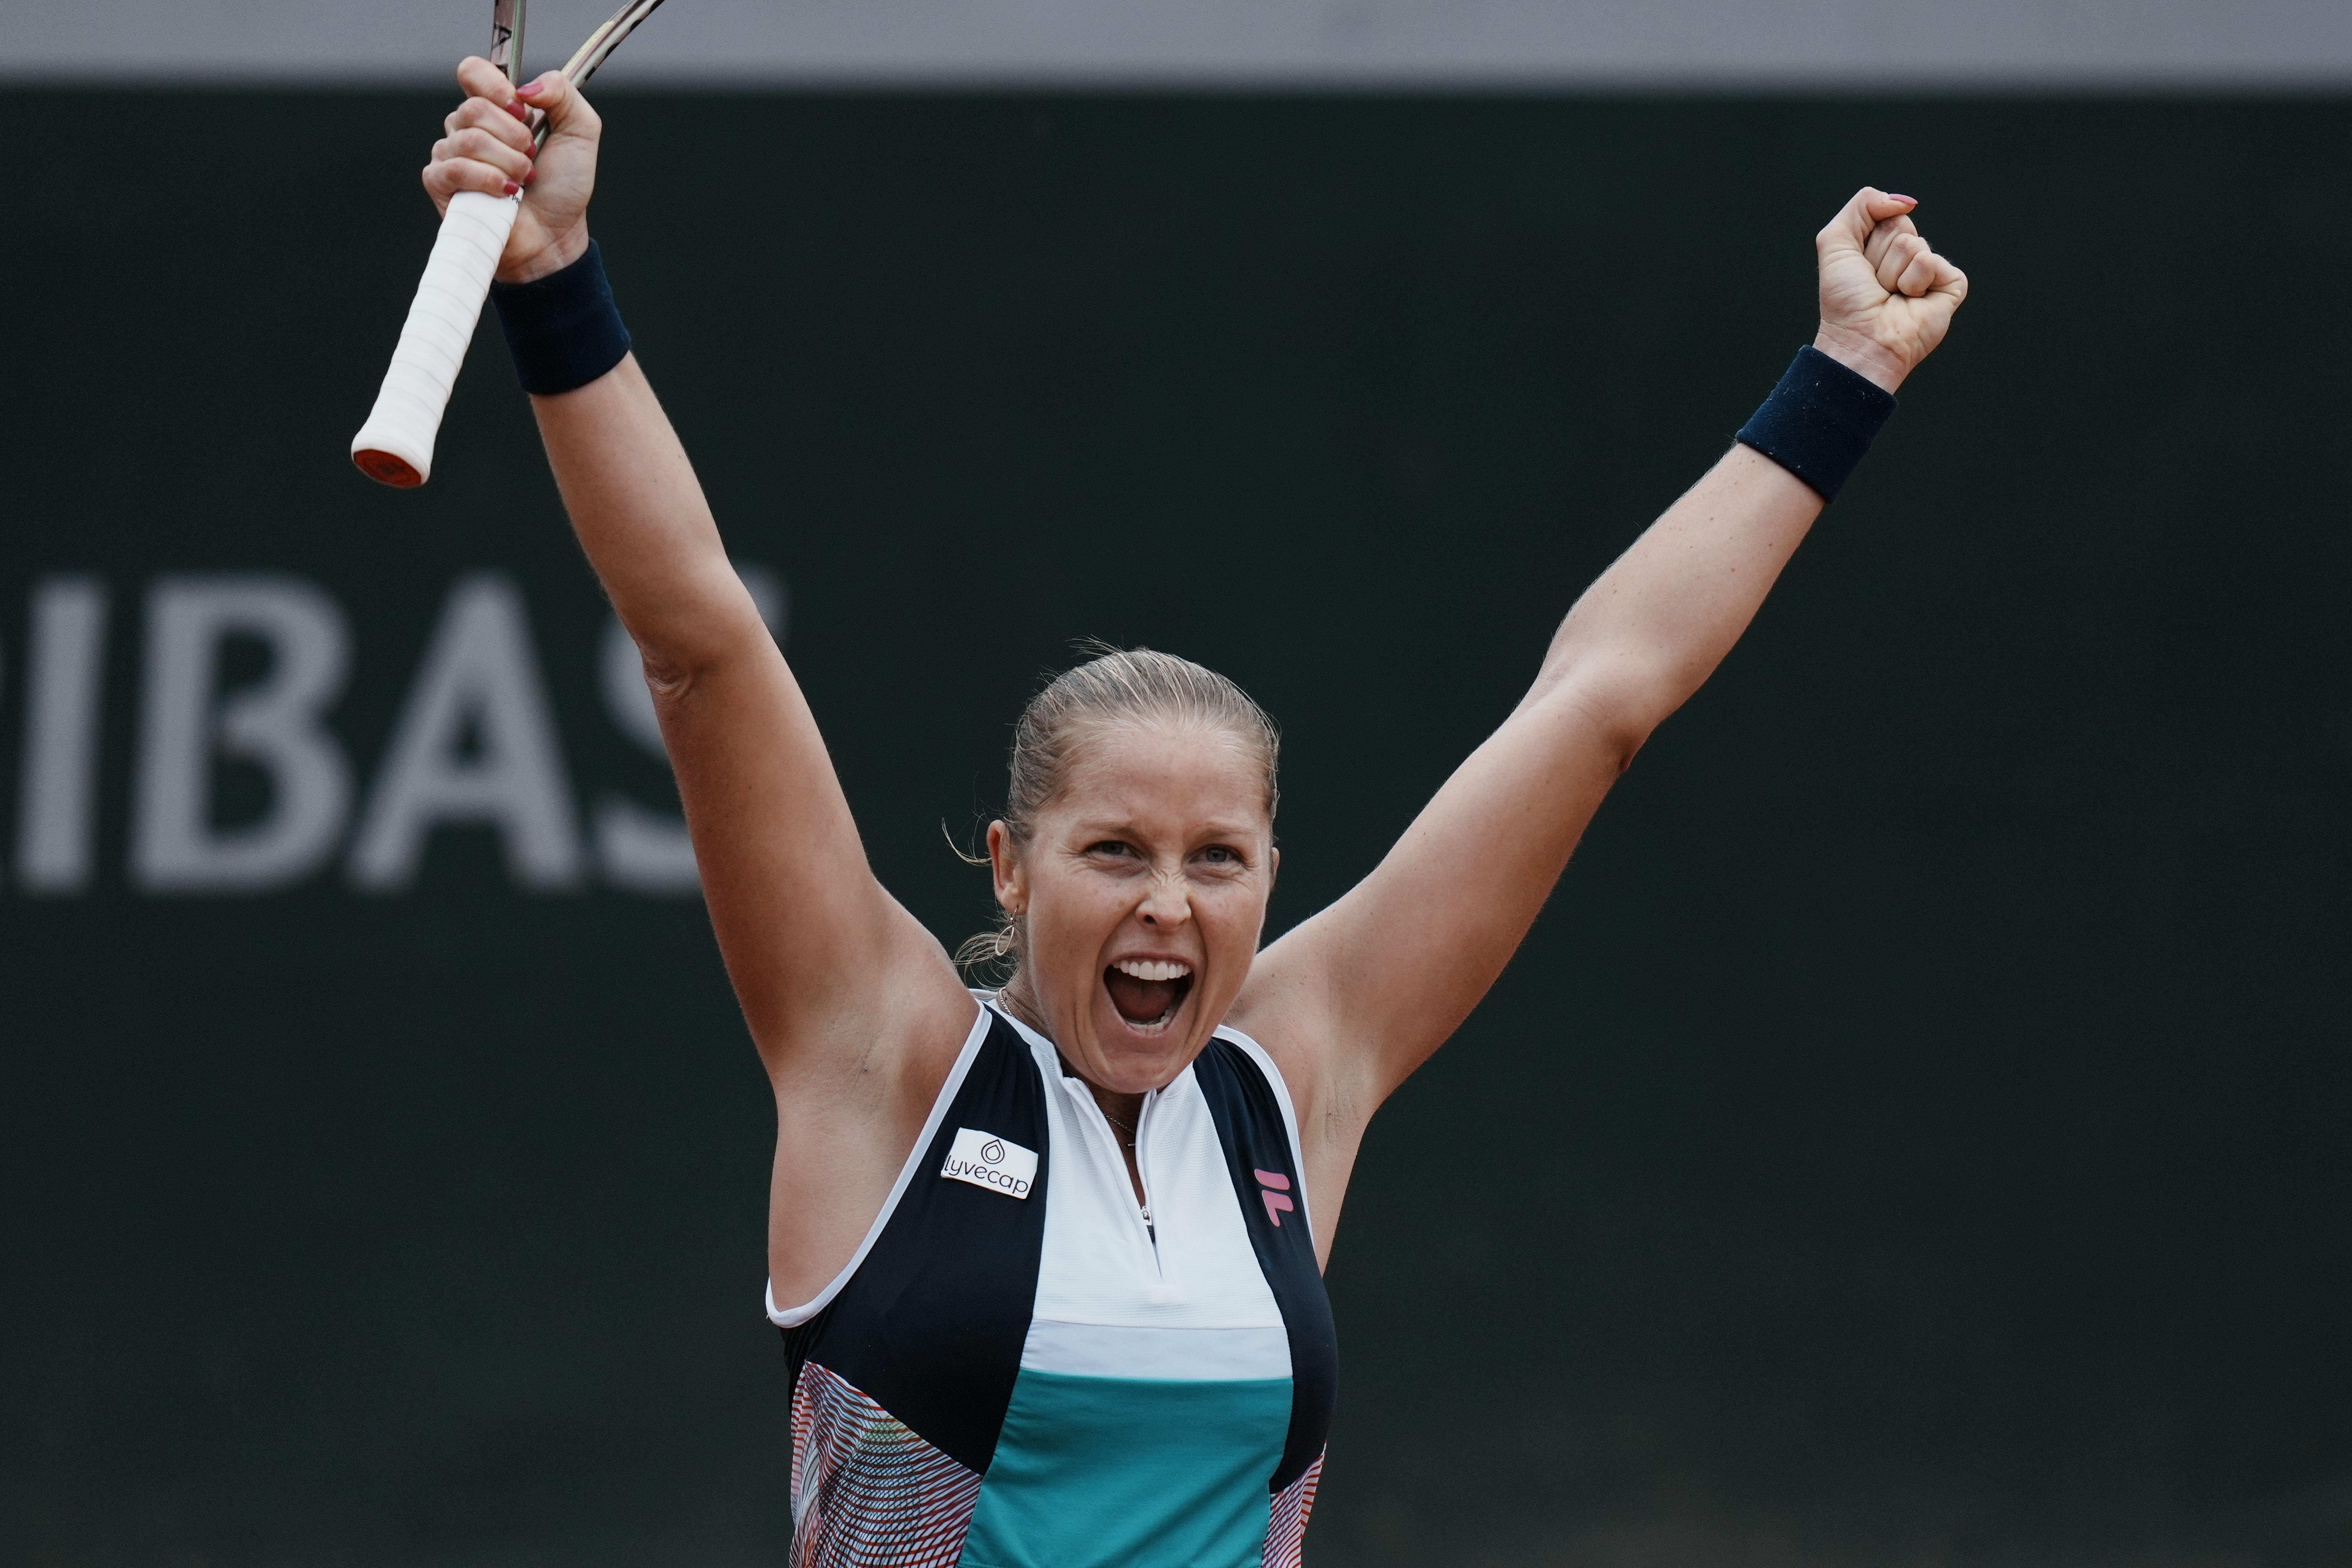 Shelby Rogers upsets 9th seed Danielle Collins in 2nd round of French Open